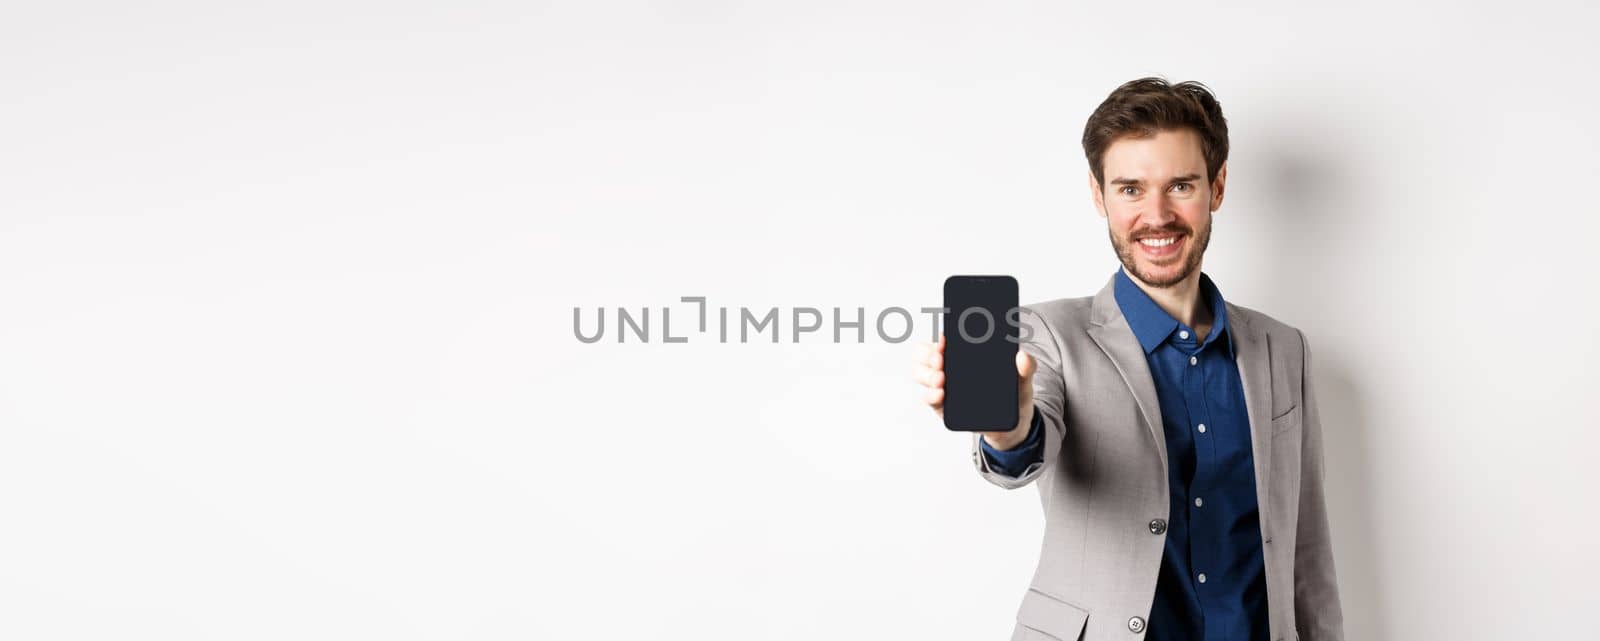 E-commerce and online shopping concept. Confident businessman in suit stretch out hand with empty smartphone screen, showing on phone, standing against white background.